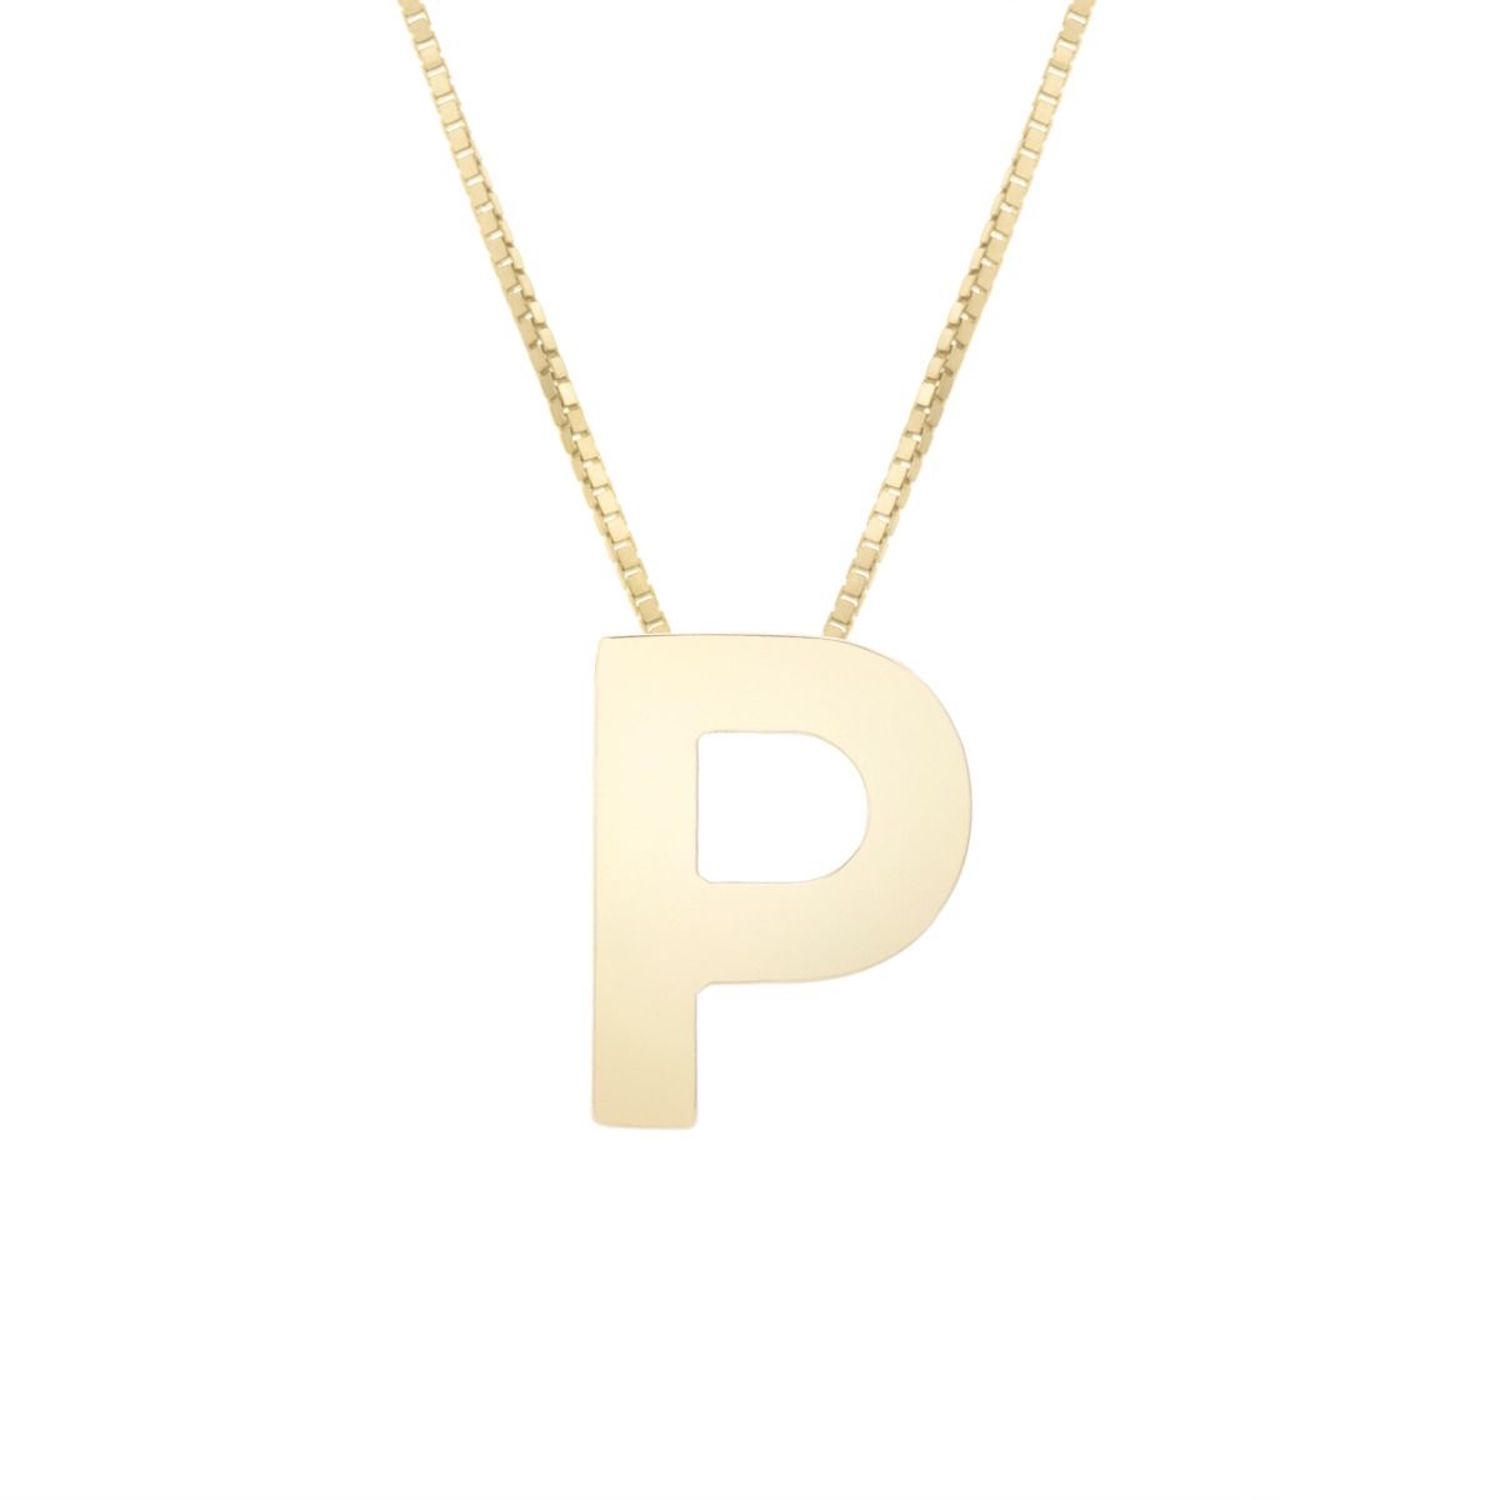 14K Yellow Gold Block Letter Initial Pendant Box Chain Necklace 16"-18" - P